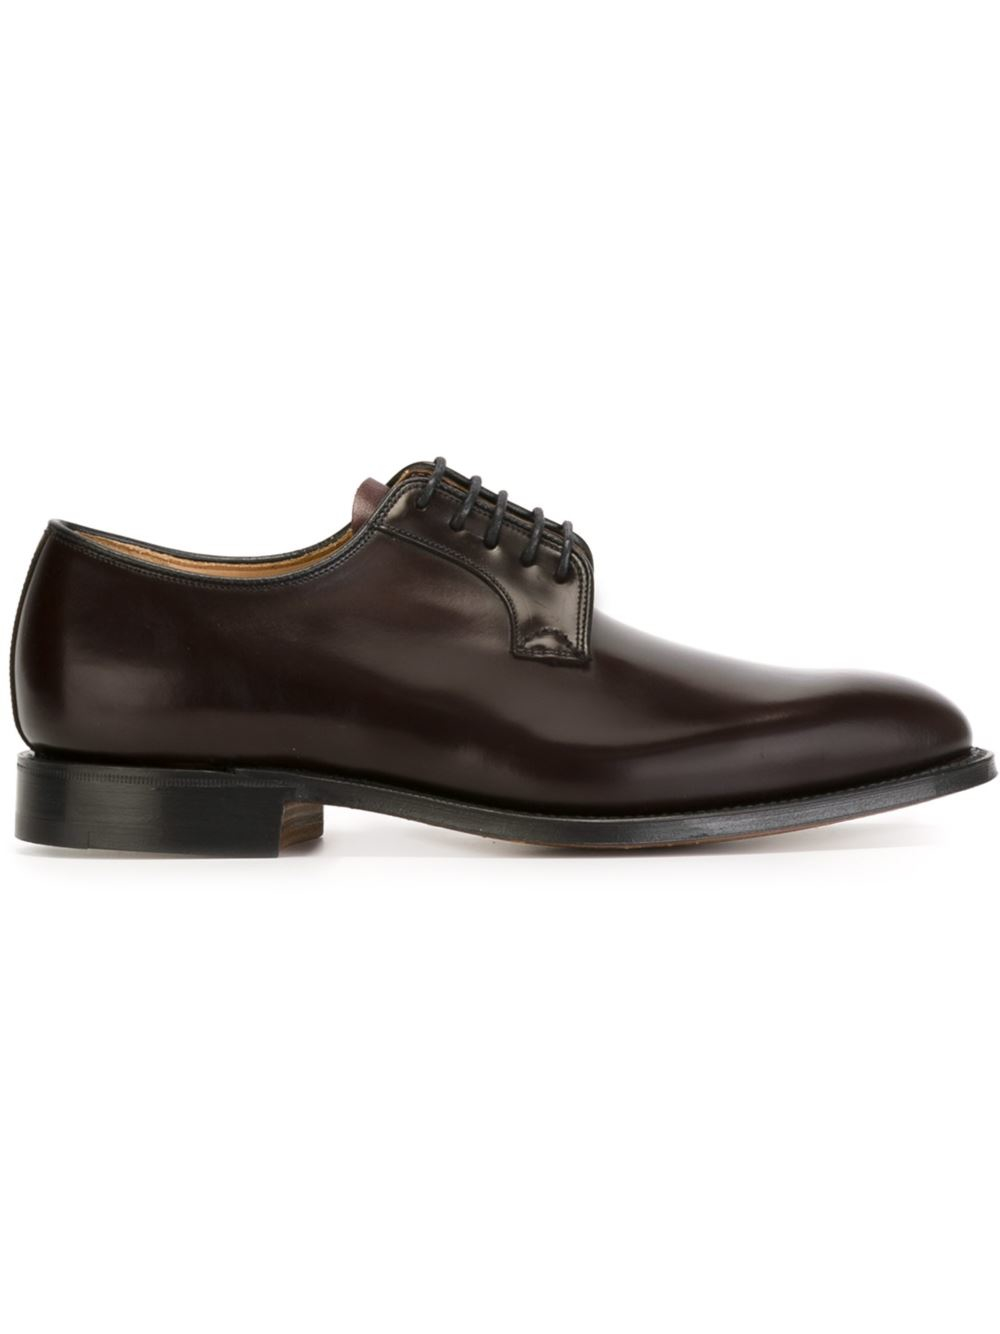 Church's Leather Church S Stratton Derby Shoes in Brown for Men - Lyst